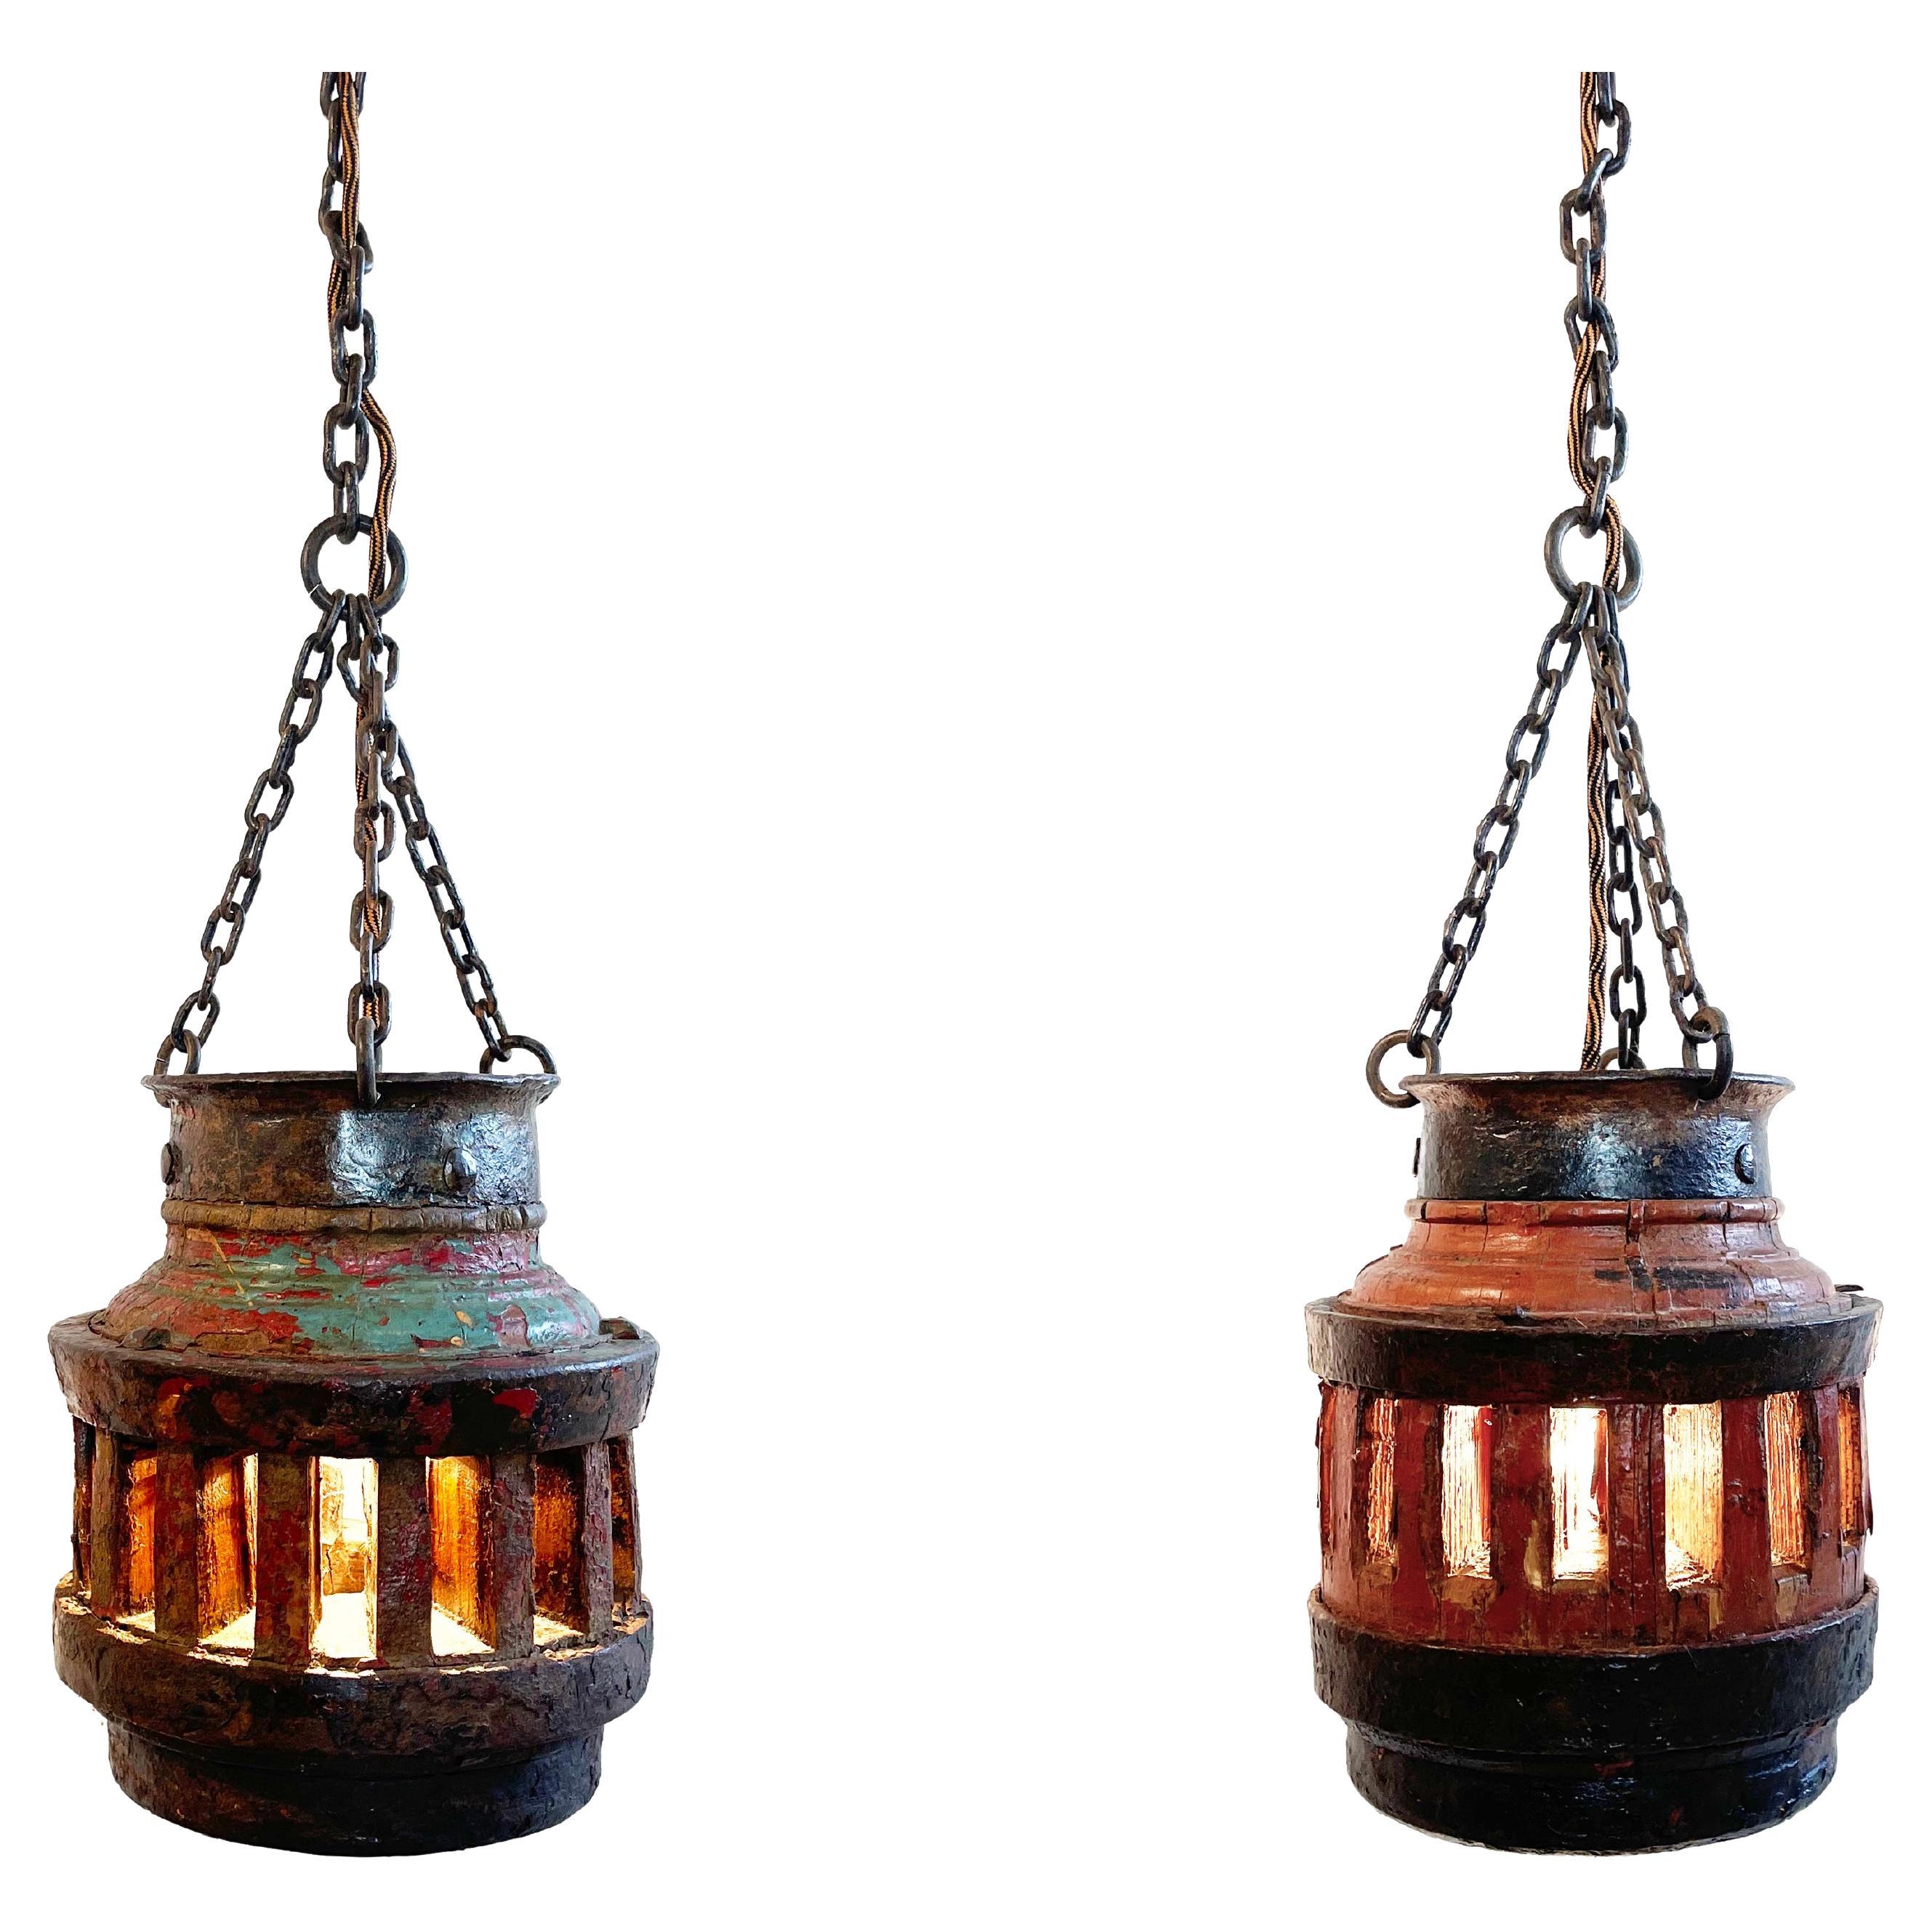 Antique Pair of Wooden Wagon Wheel Hub Pendant Lamps & Chains, Germany ca. 1850s